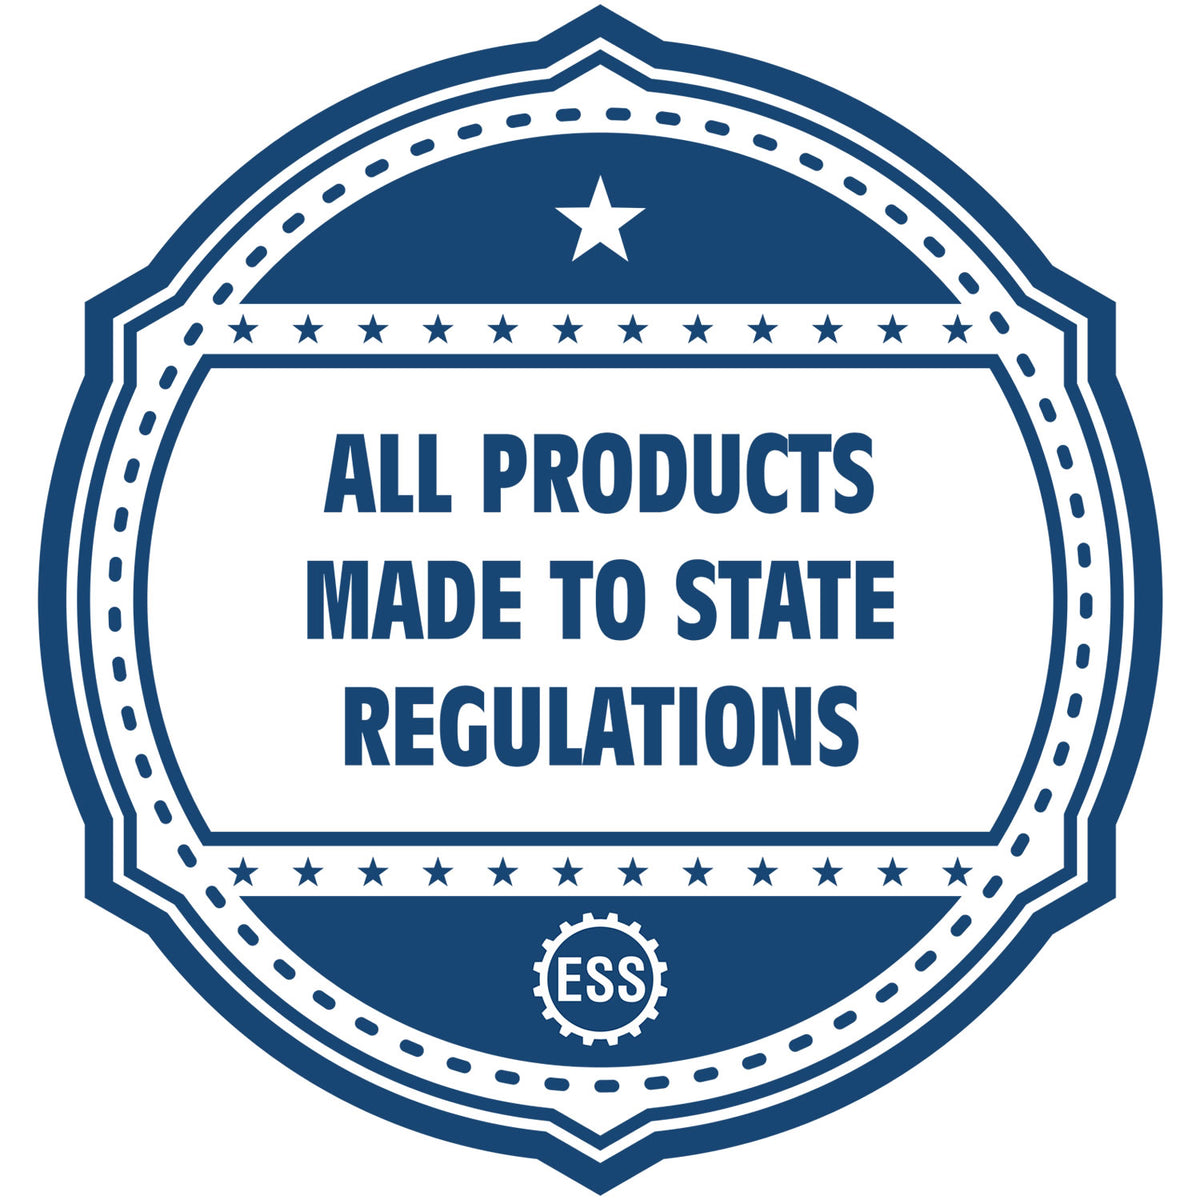 An icon or badge element for the Premium MaxLight Pre-Inked Utah Engineering Stamp showing that this product is made in compliance with state regulations.